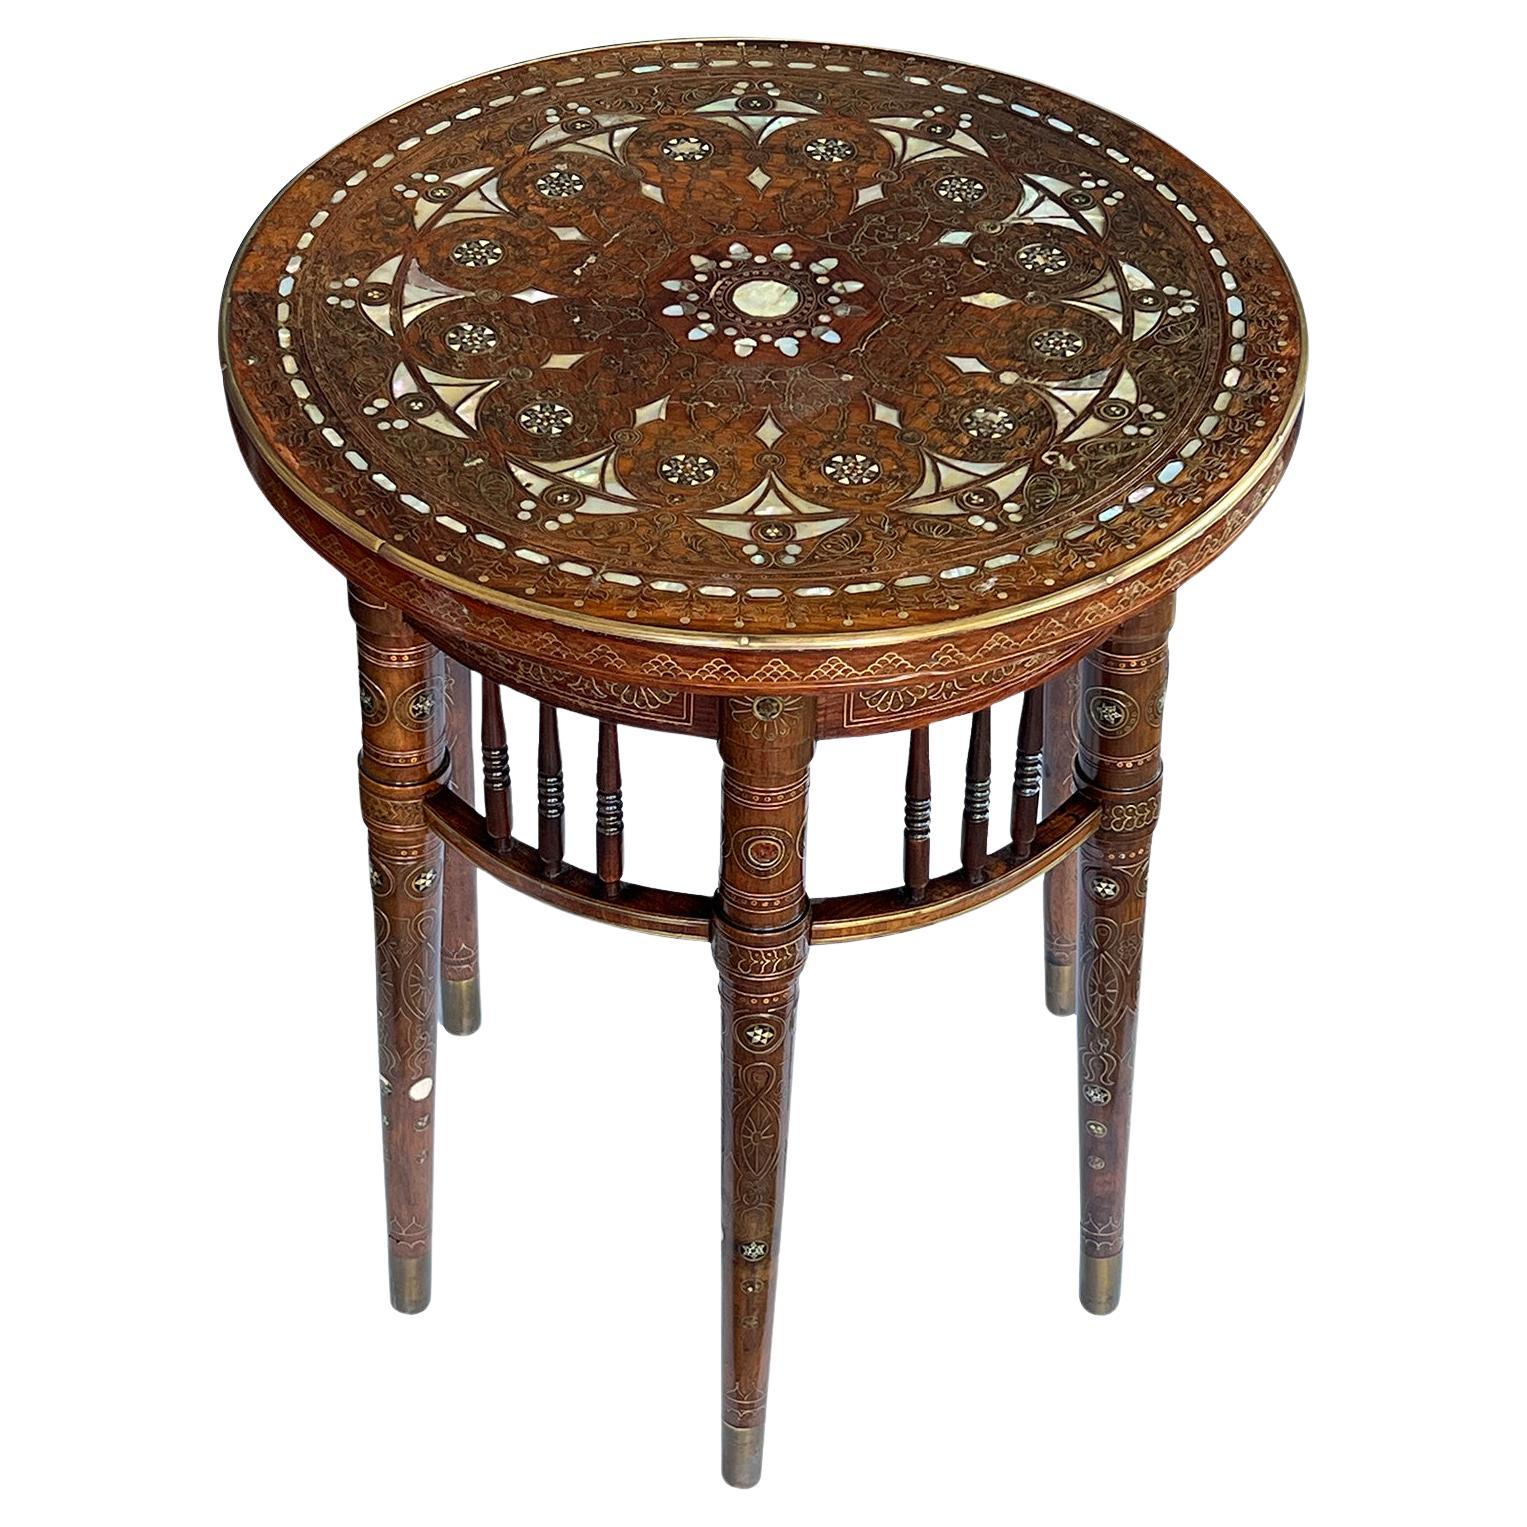 A Rare Anglo-Persian Inlaid Circular Occasional/Drinks Table  For Sale